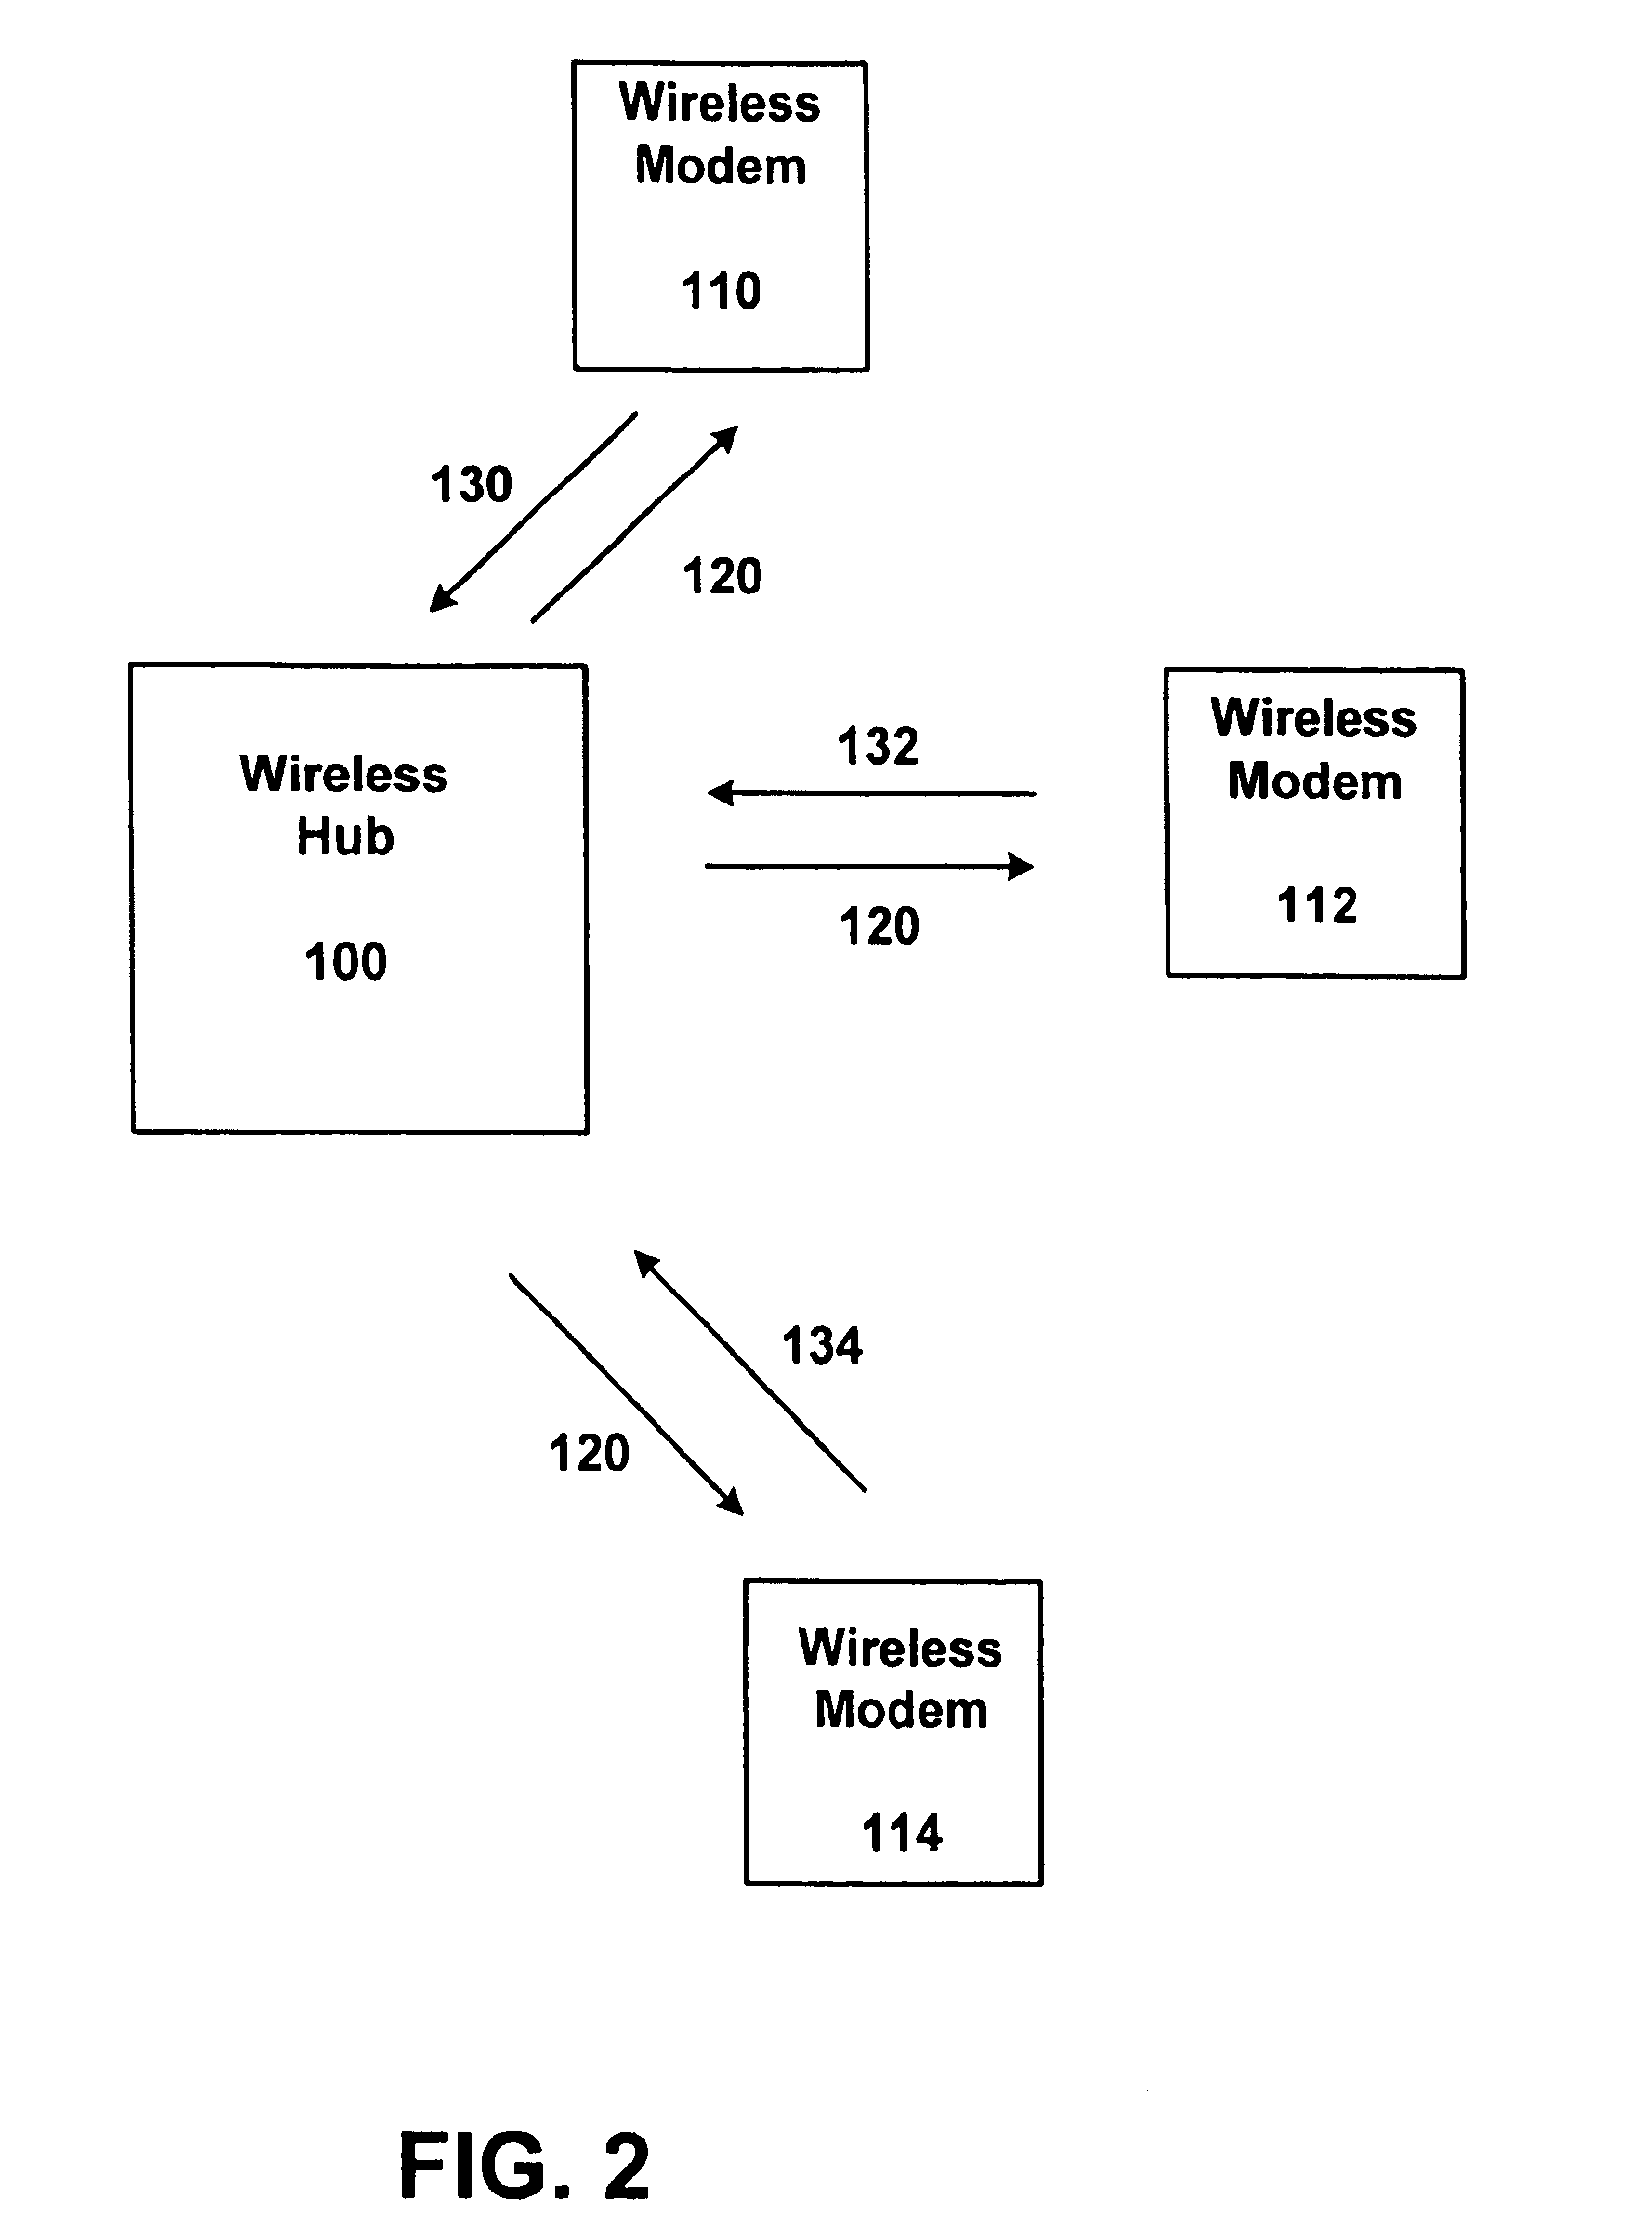 Two-dimensional scheduling scheme for a broadband wireless access system